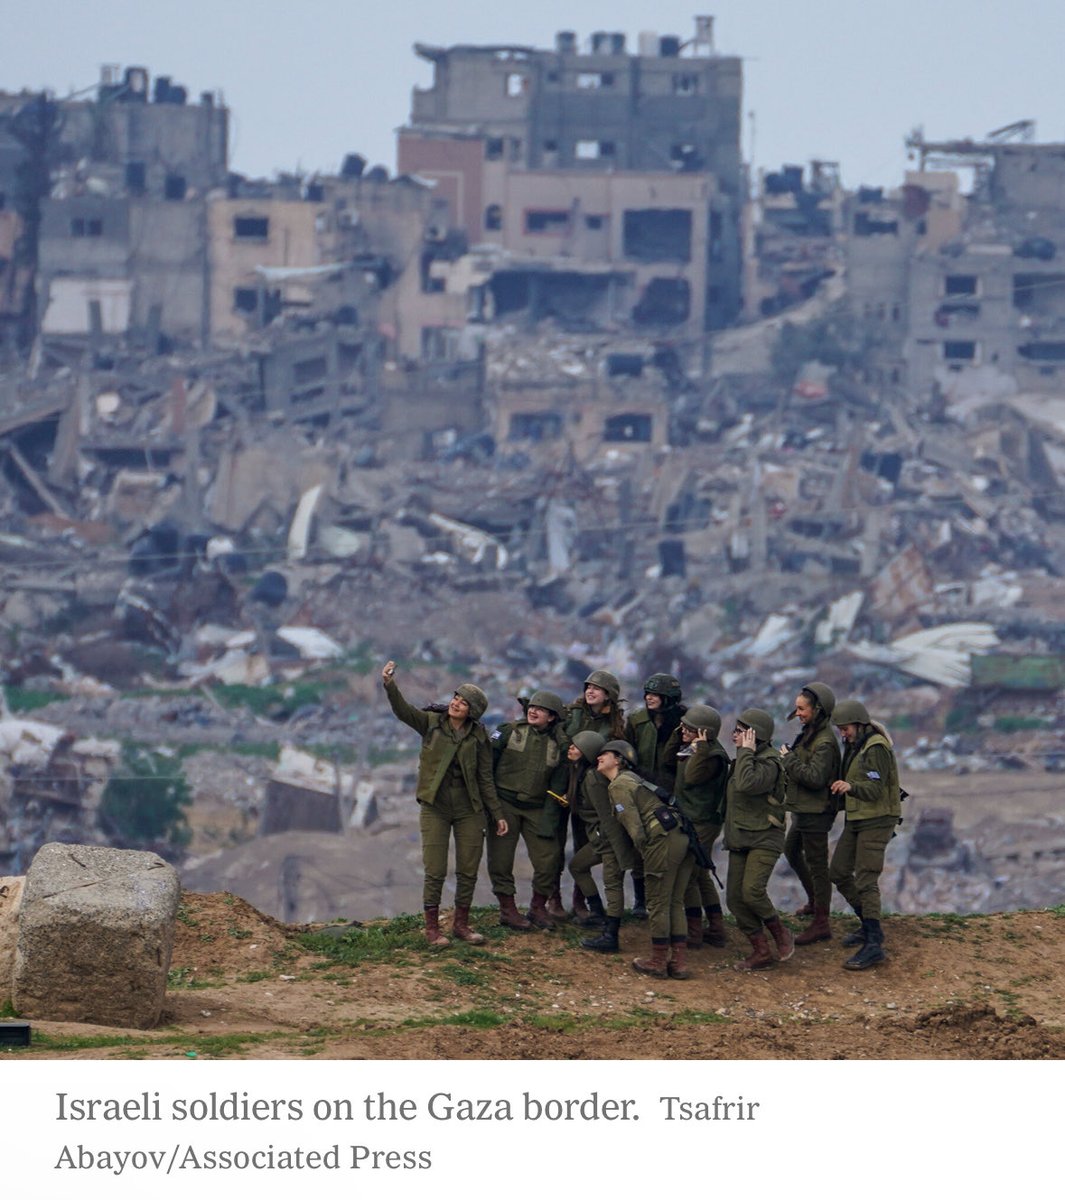 Does anyone find this as repulsive as I do? The ⁦@nytimes⁩ published a photo of Israeli soldiers taking selfies to celebrate the massive destruction they caused in Gaza -- destruction that experts believe amounts to genocide. Sign of a society in deep moral decay.⤵️